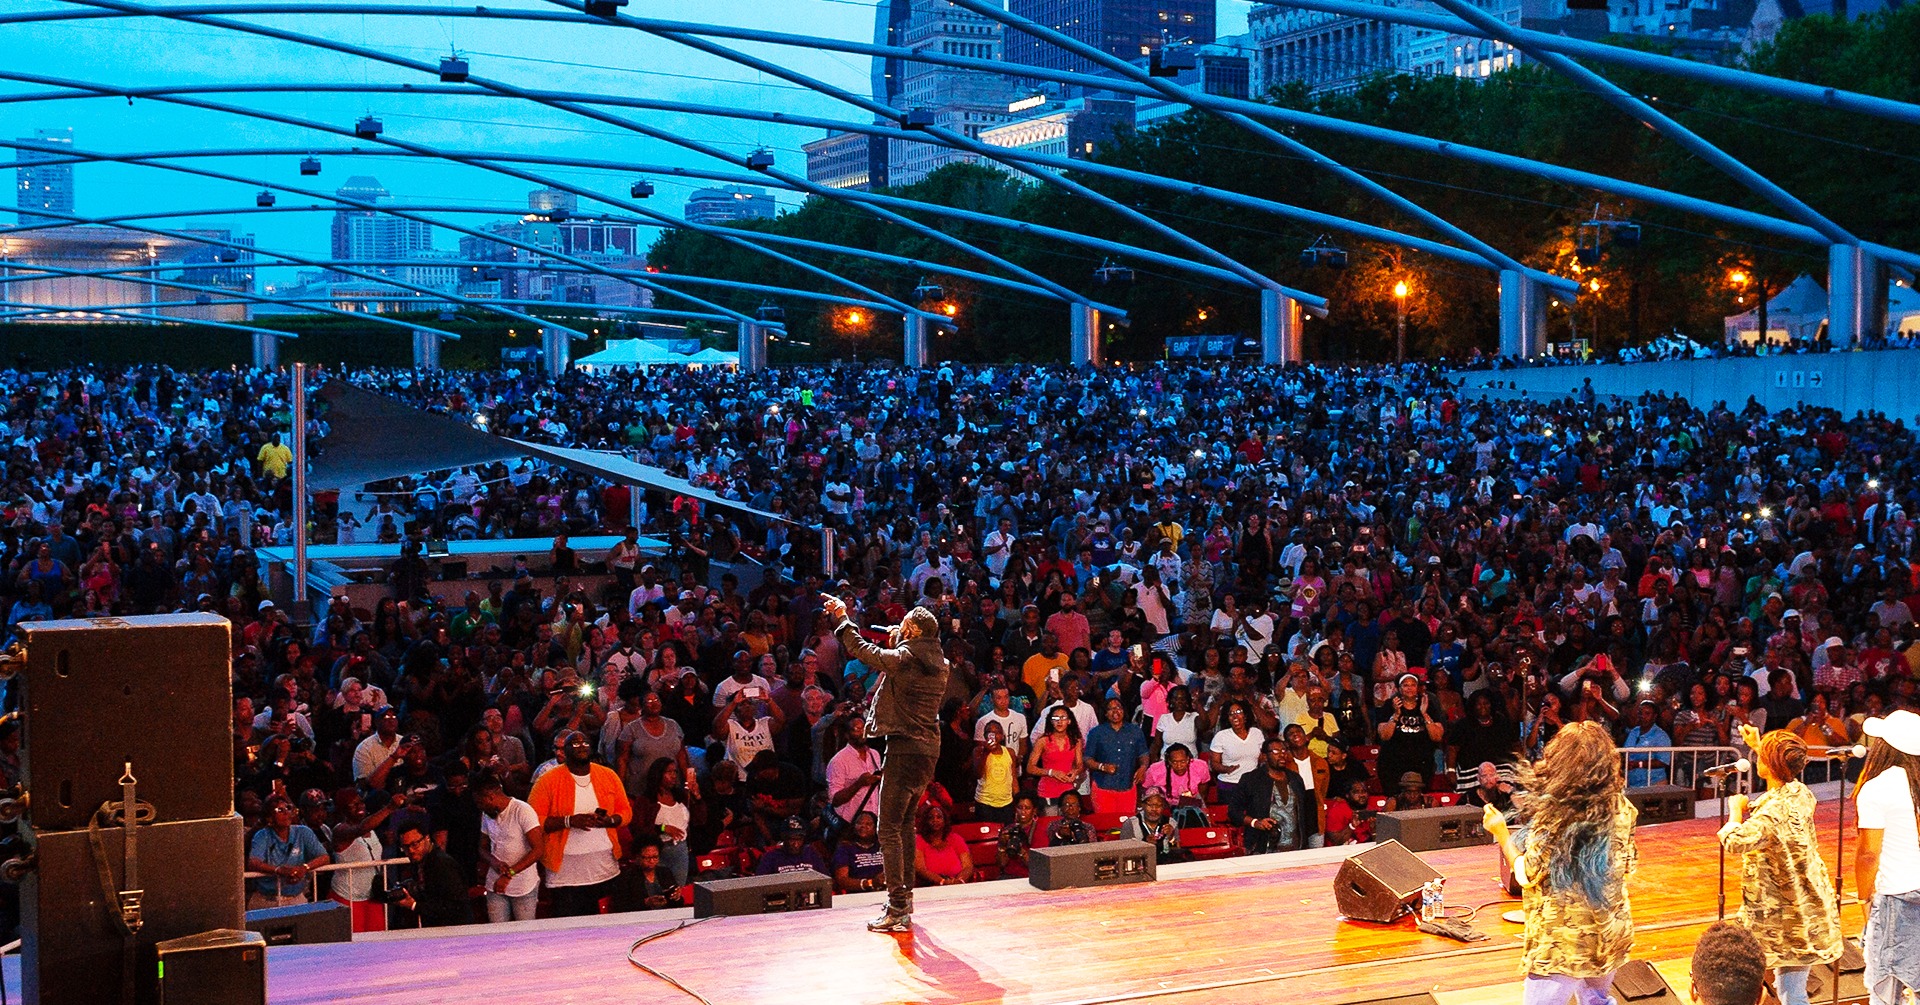 Chicago Gospel Fest 2023 Dates, Lineup, and More